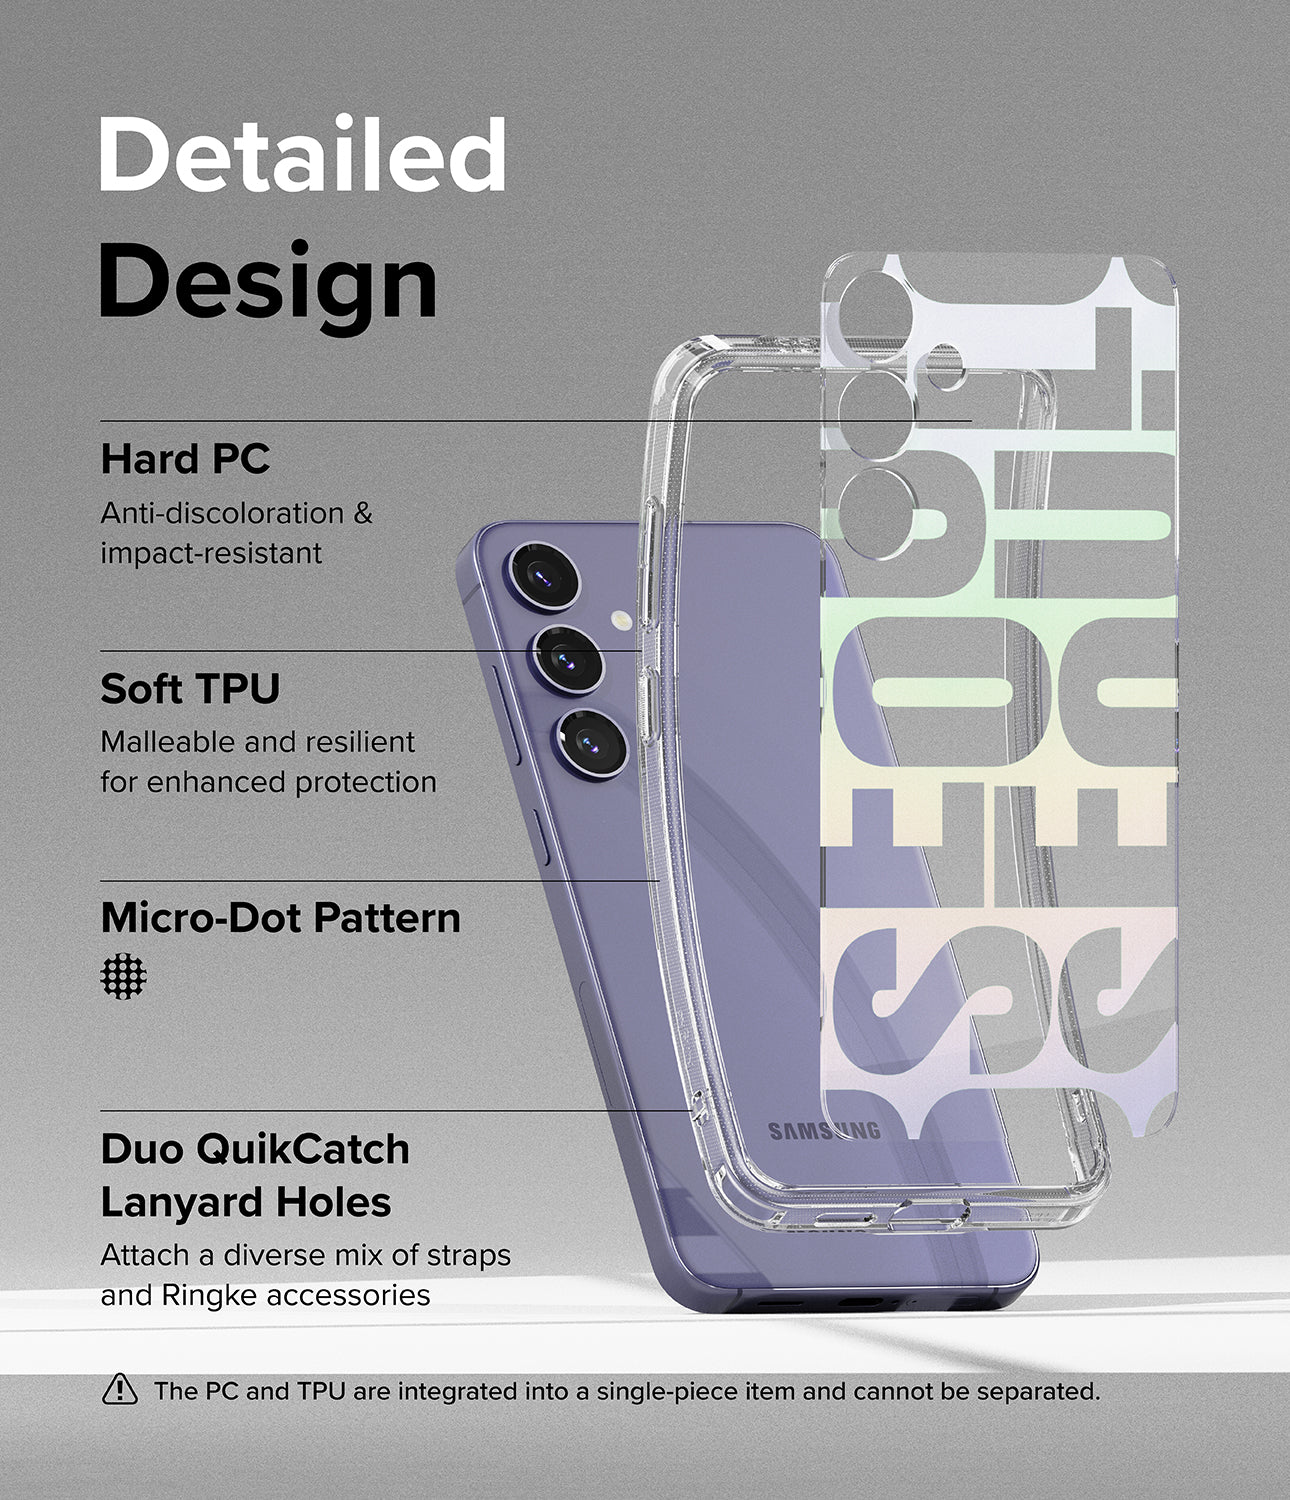 Galaxy S24 Case | Fusion Design - Seoul - Detailed Design. Anti-discoloration and impact-resistant with Hard PC. Malleable and resilient for enhanced protection with Soft TPU. Micro-Dot Pattern. Attach a diverse mix of straps and Ringke accessories with Duo QuikCatch Lanyard Holes.